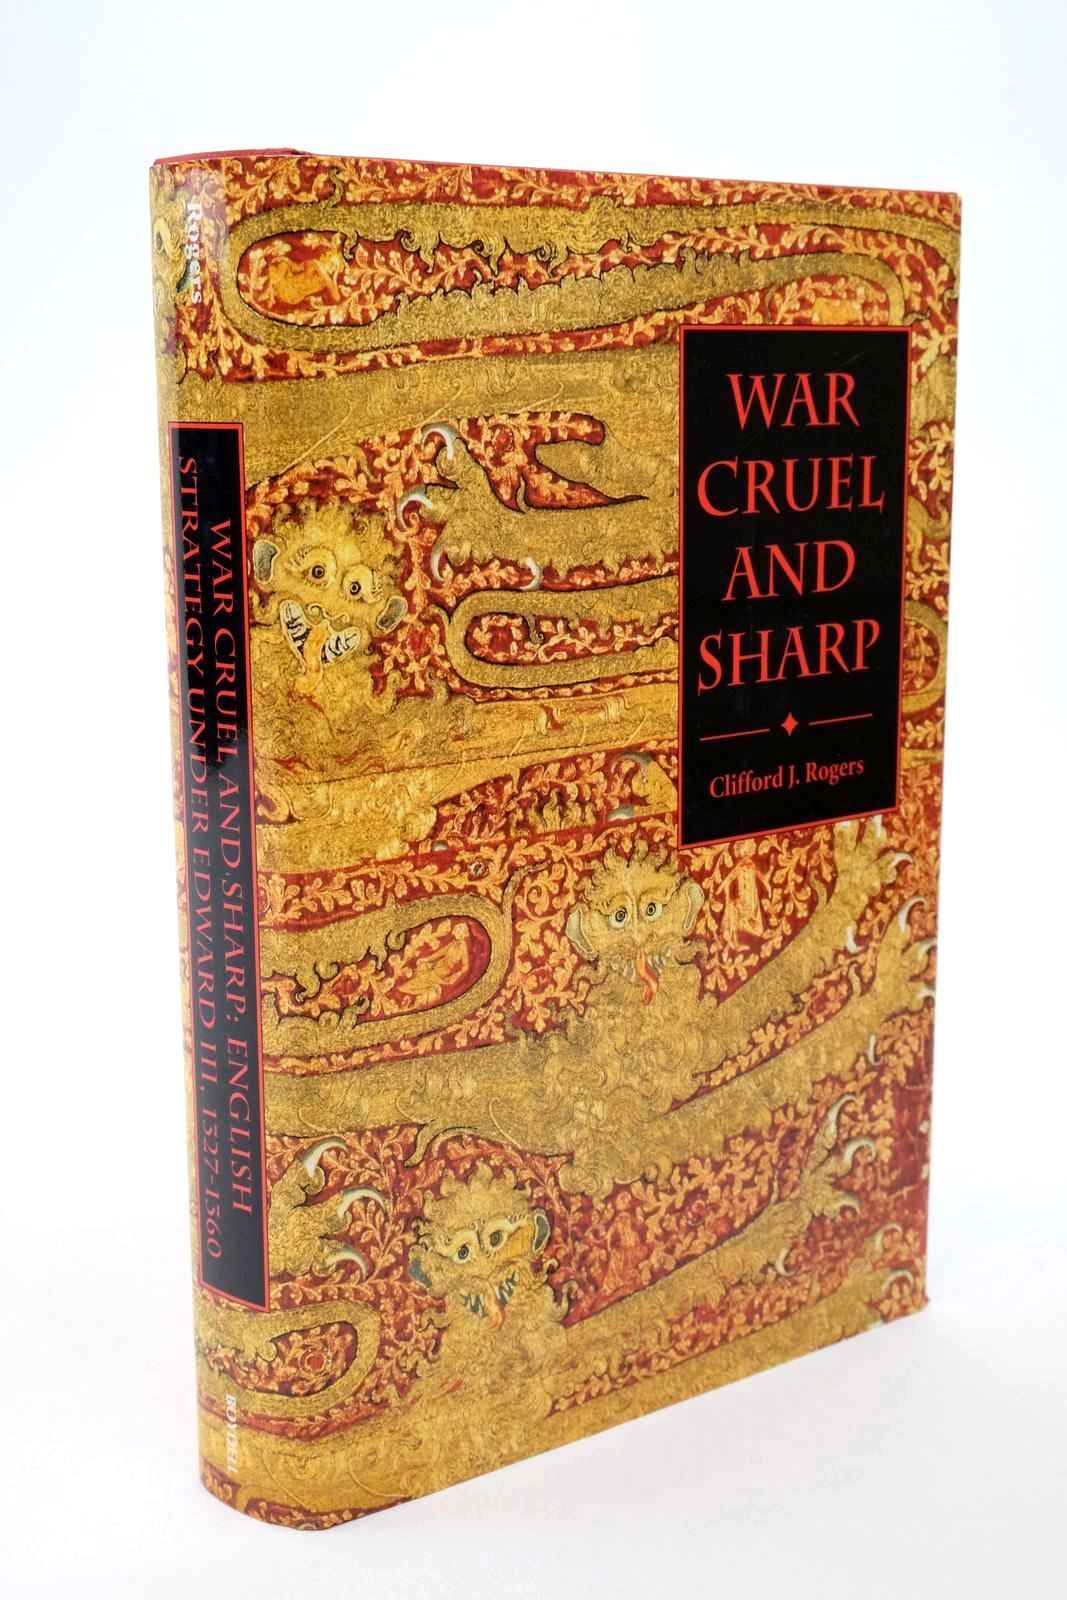 Photo of WAR CRUEL AND SHARP: ENGLISH STRATEGY UNDER EDWARD III, 1327-1360 written by Rogers, Clifford published by The Boydell Press (STOCK CODE: 1322612)  for sale by Stella & Rose's Books